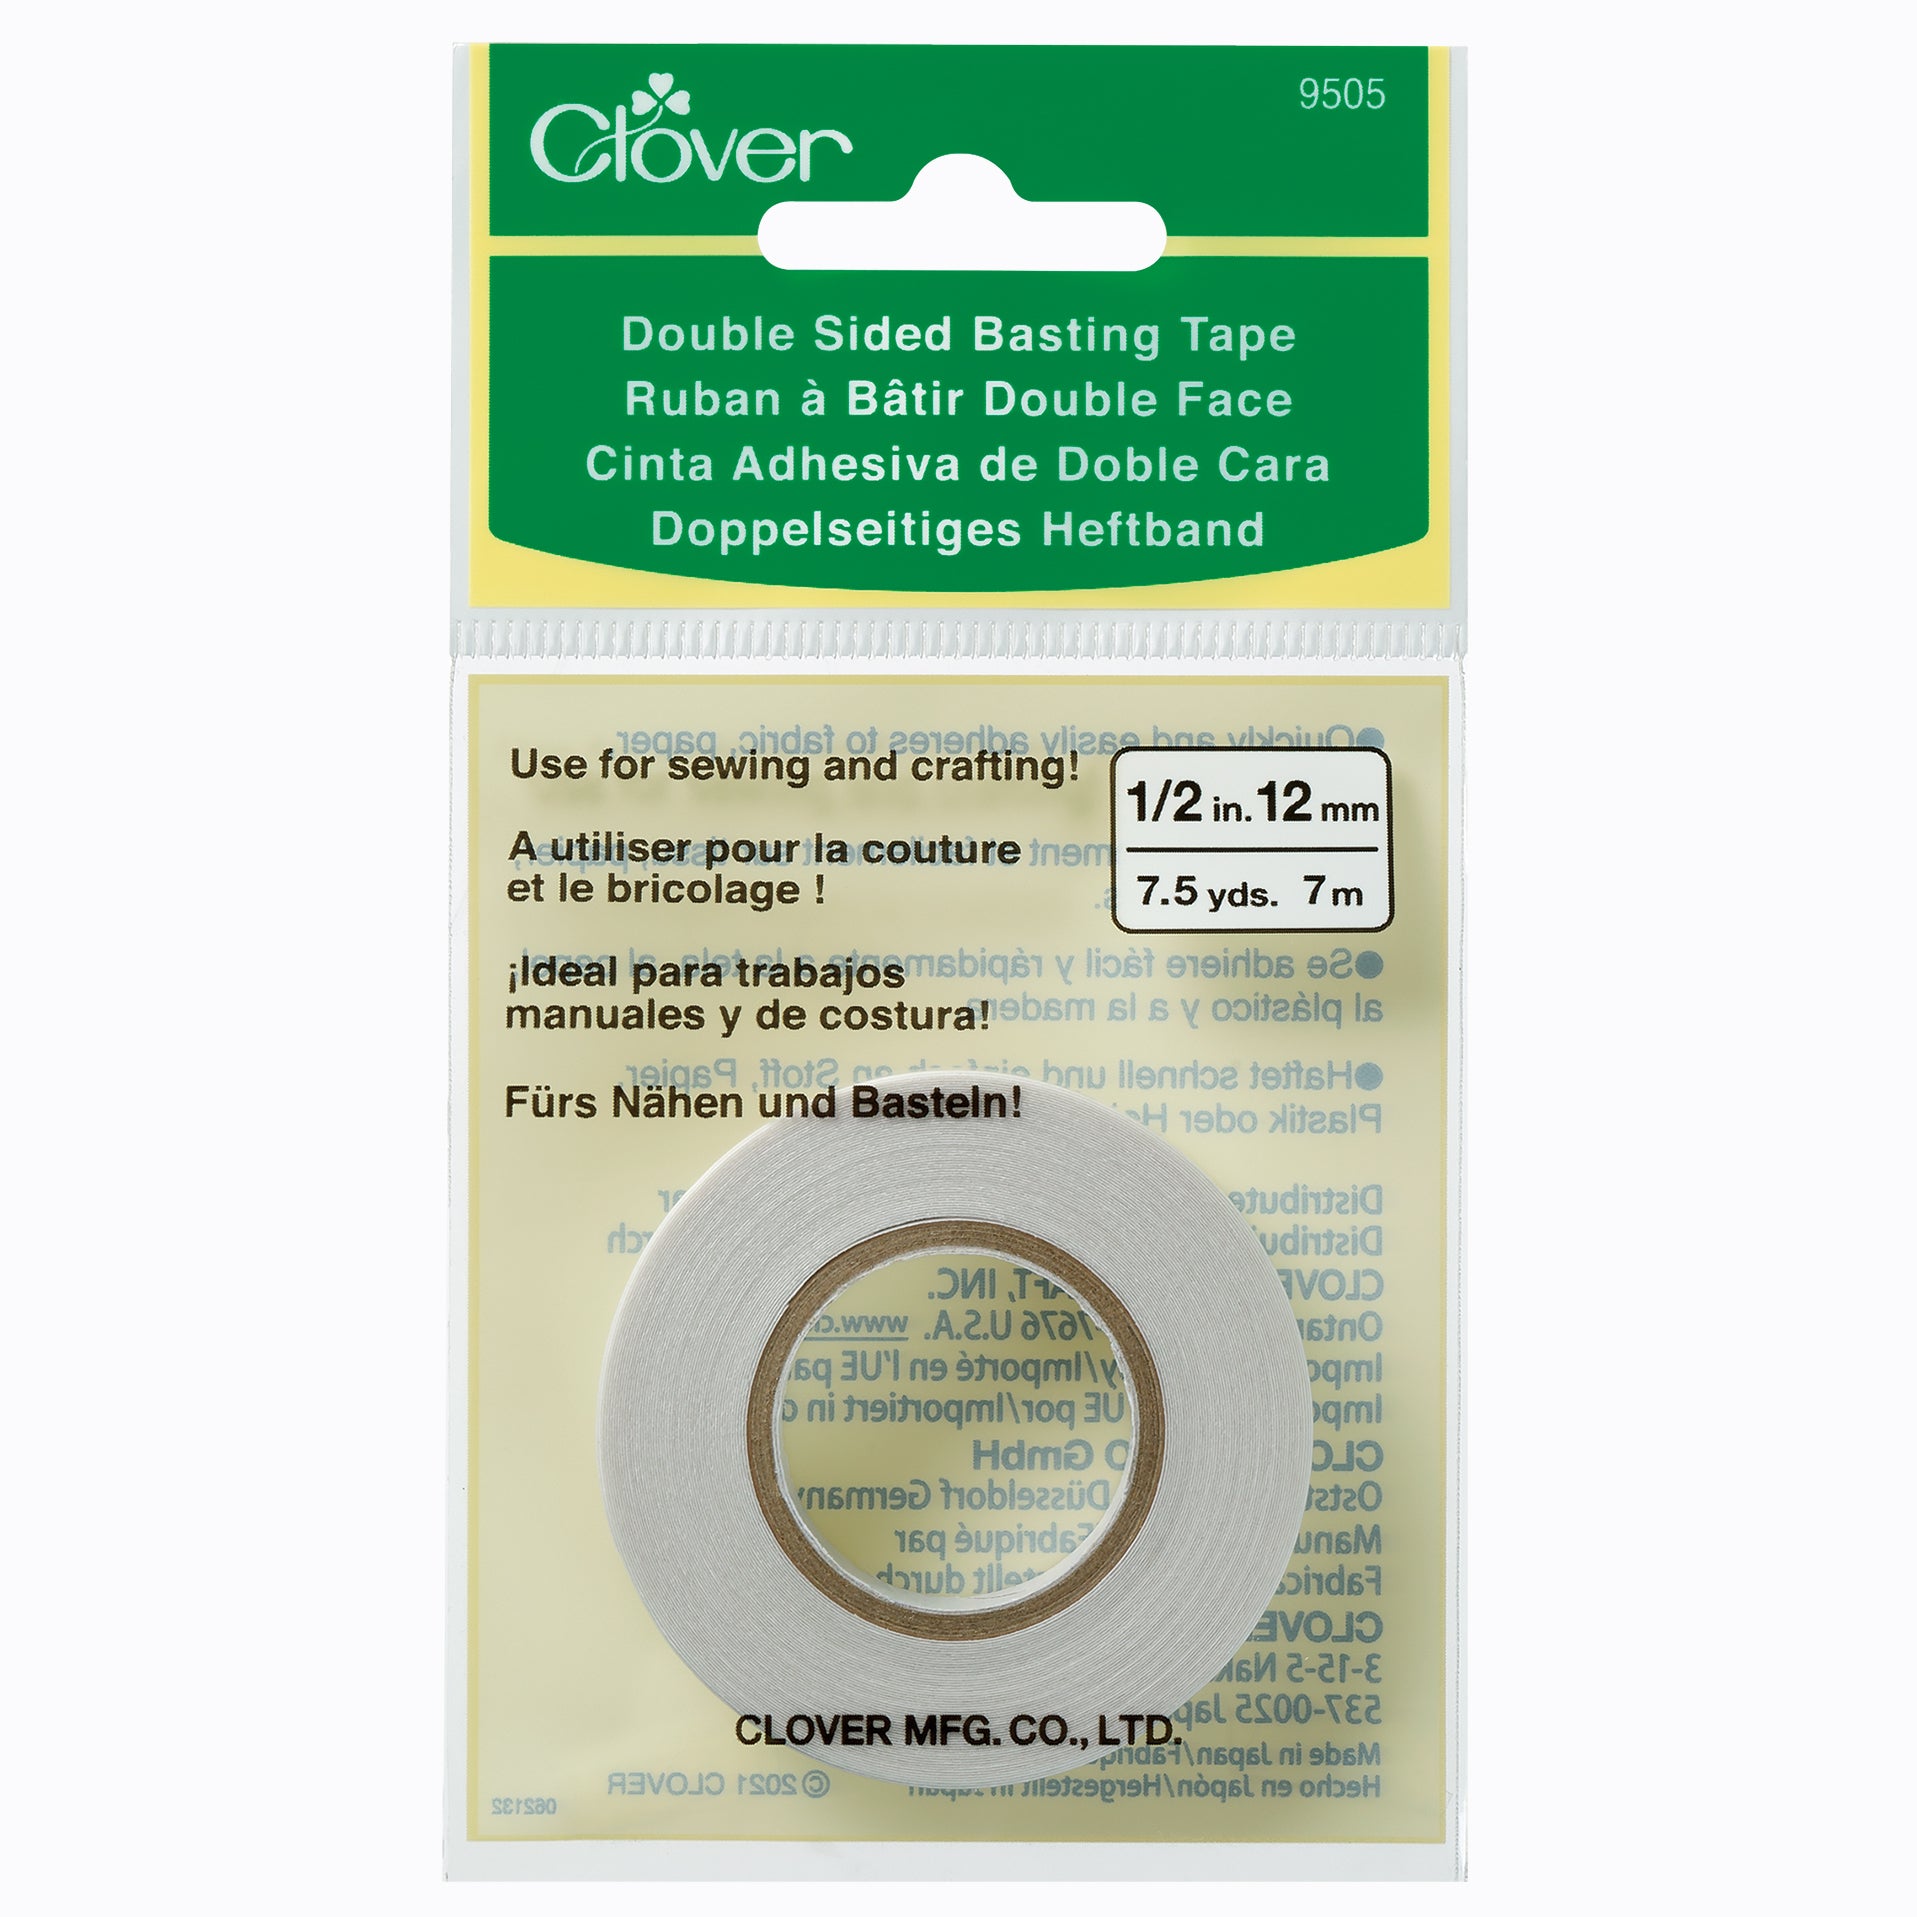 Sewing Tips: Using Basting Tape